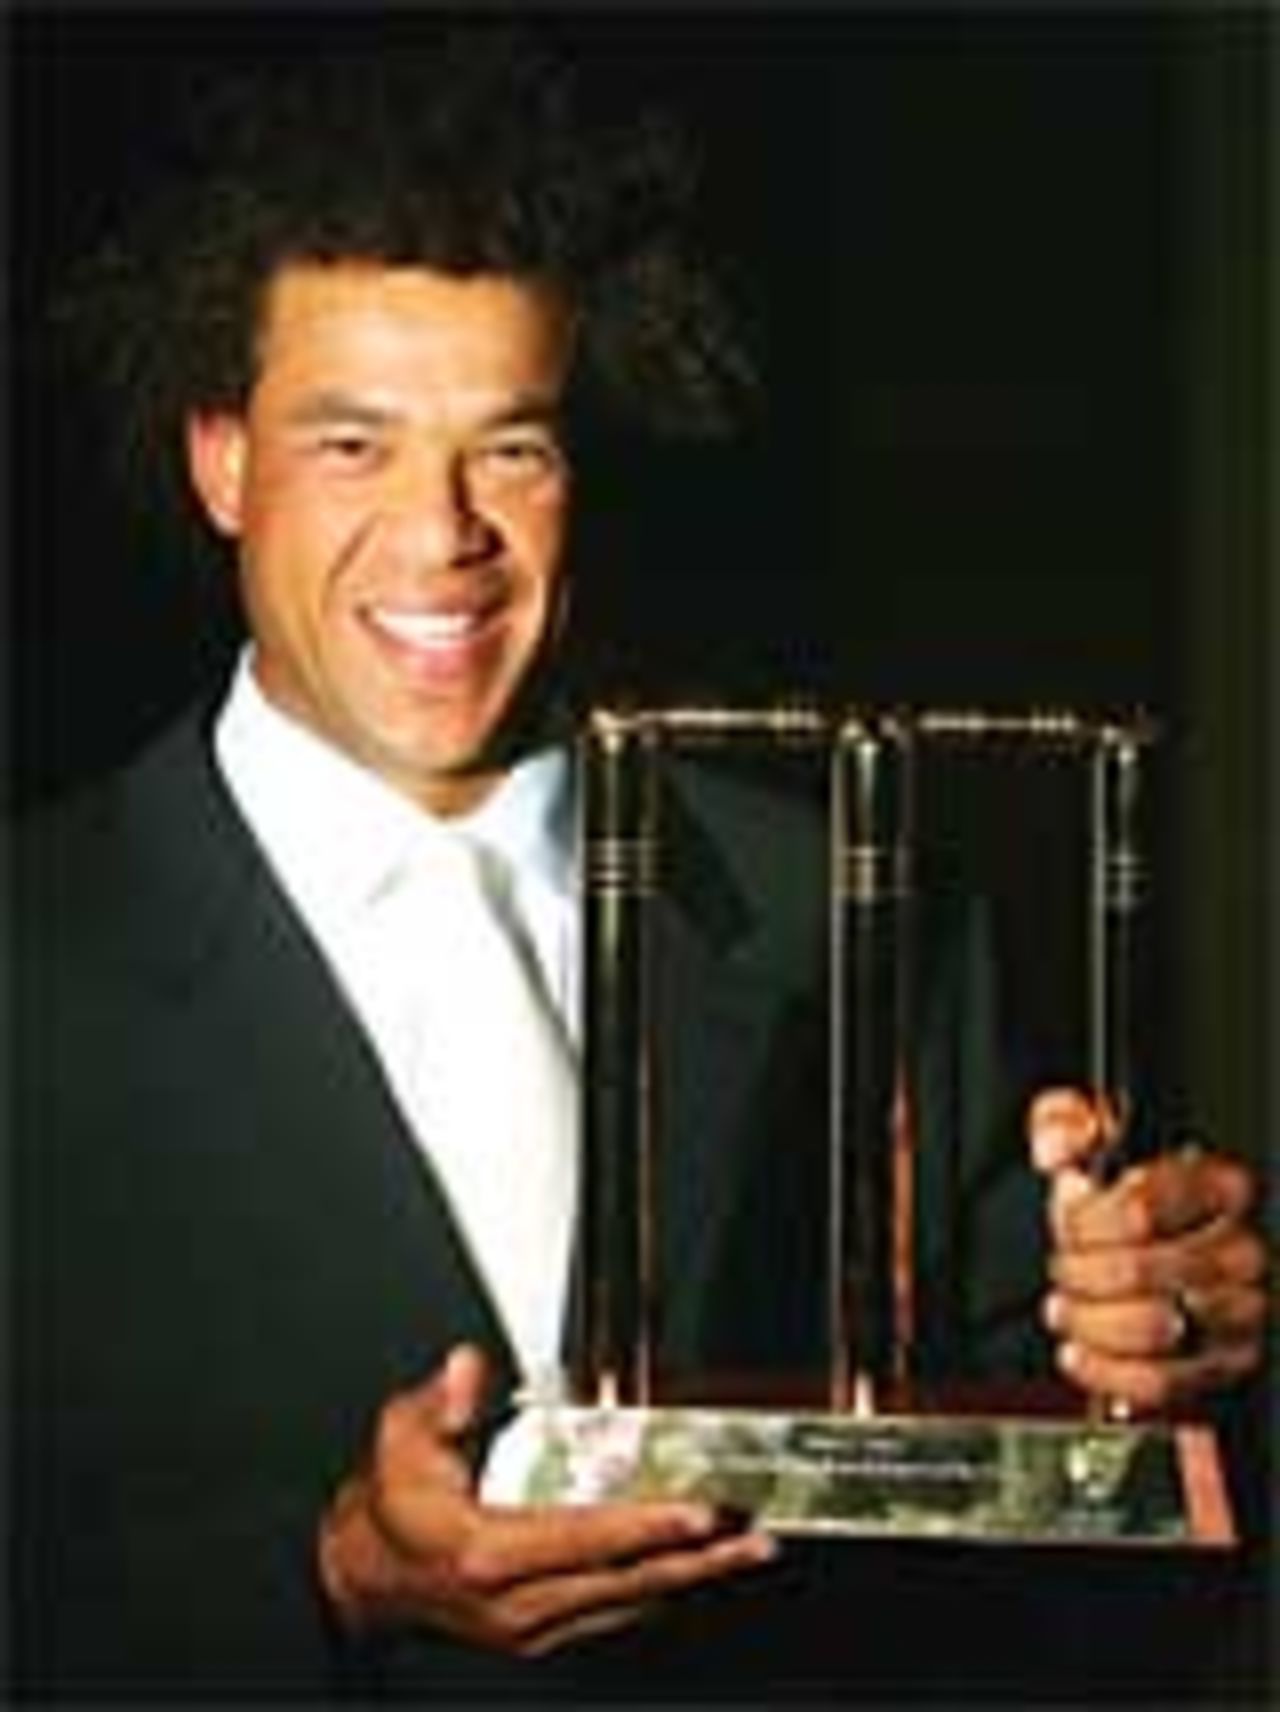 Andrew Symonds wins Australia's One Day International Player of the Year at the Allan Border Medal count, January 30, 2005